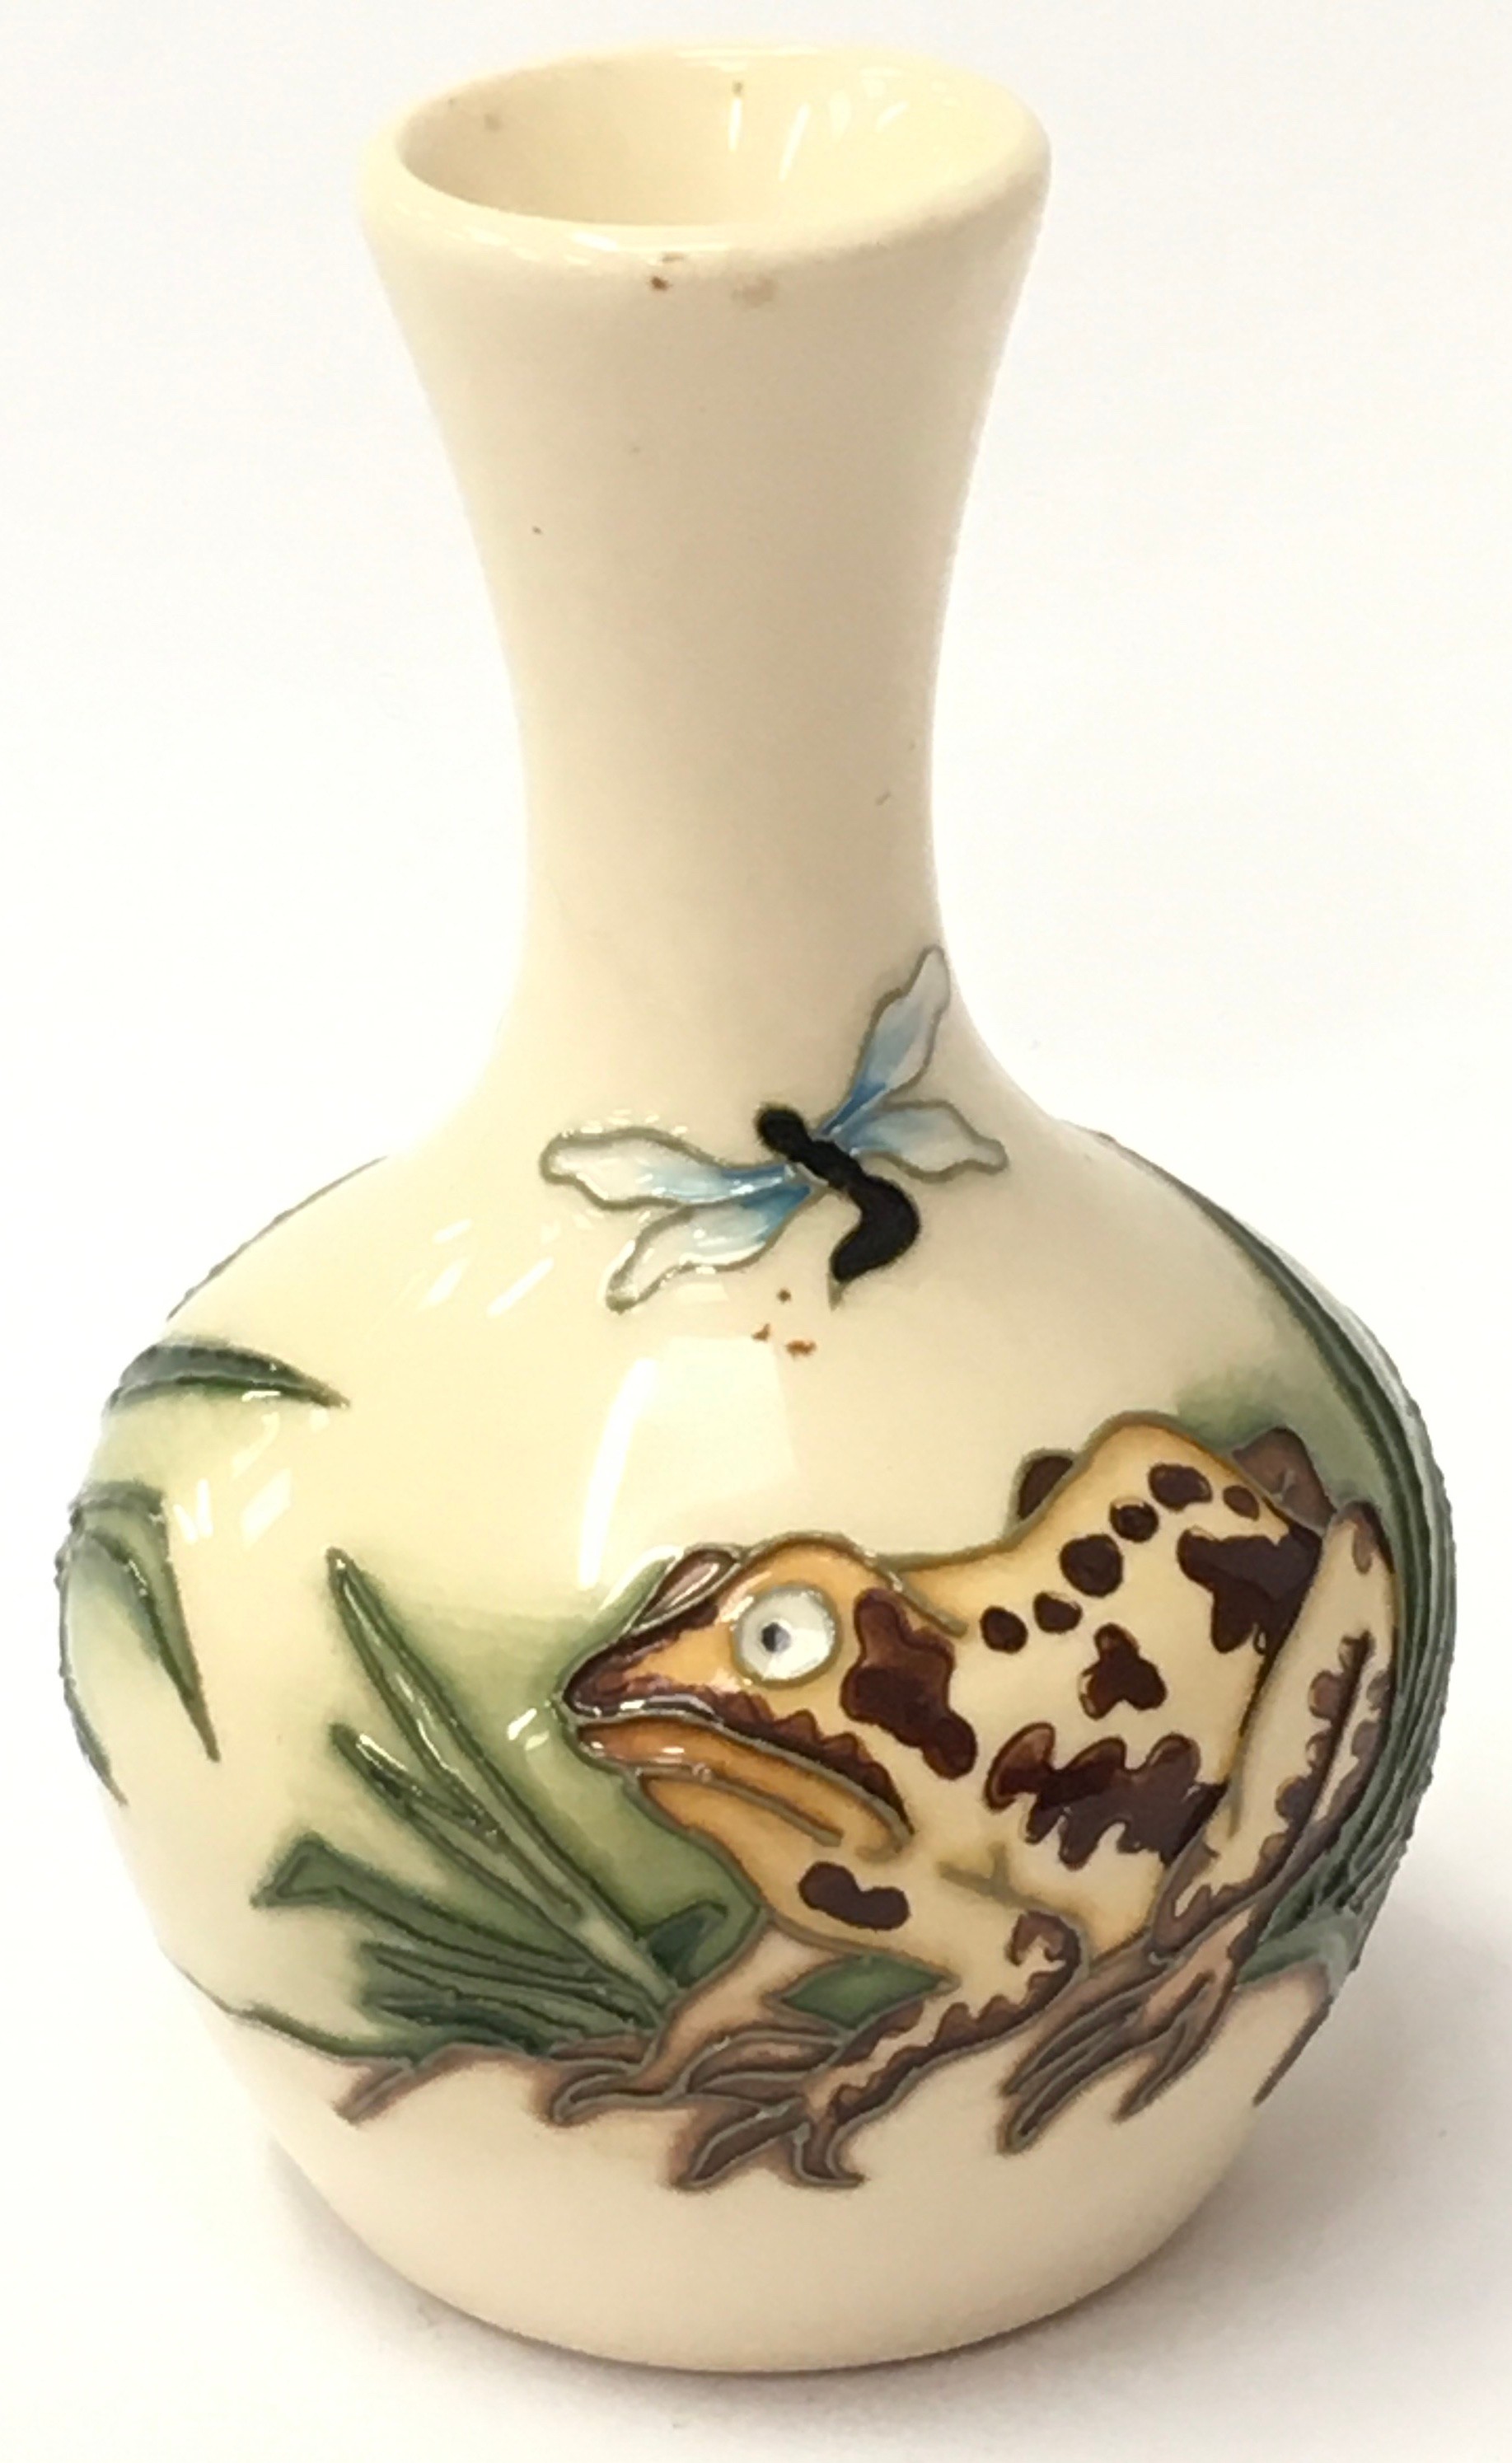 Moorcroft small vase depicting a frog 2009 fully marked & signed to base 4" high. - Image 2 of 5